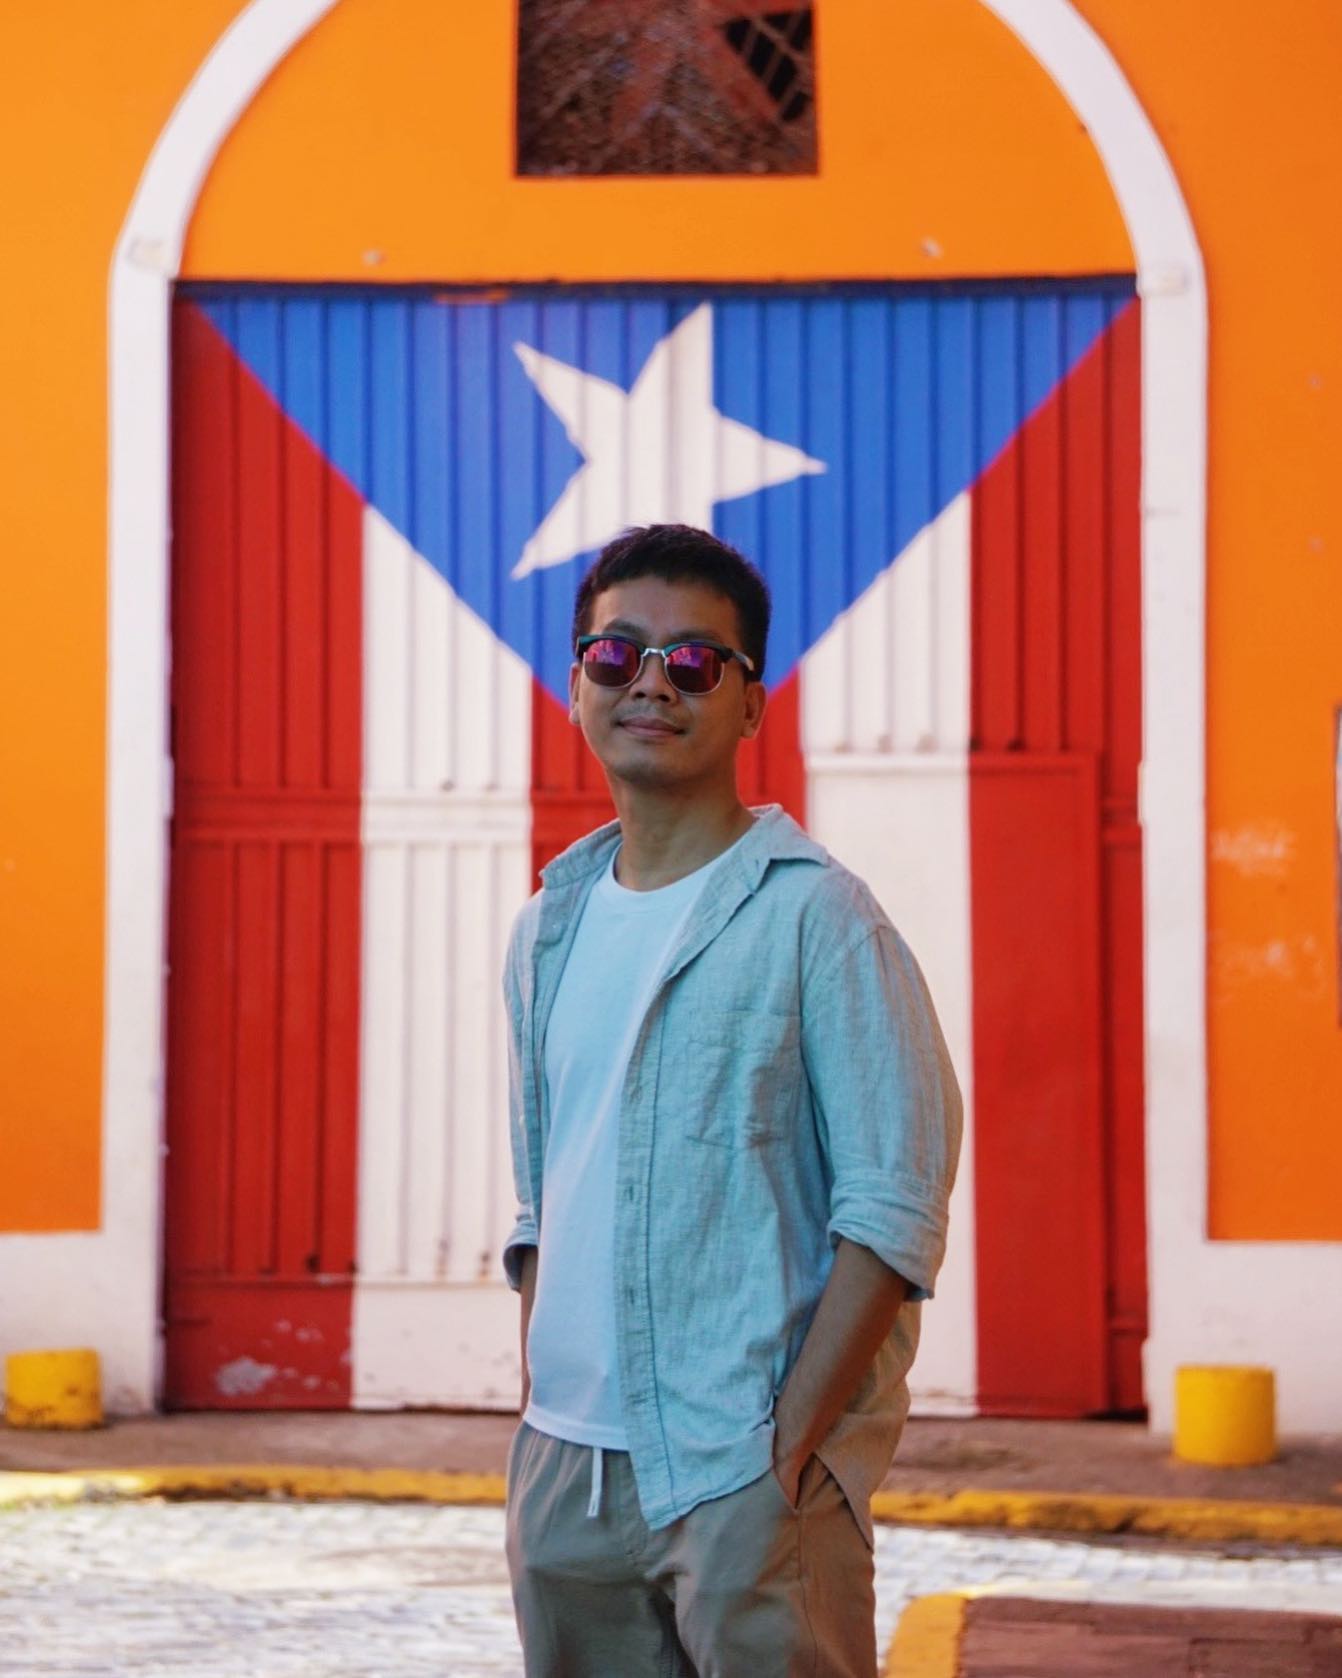 Once upon a time in Puerto Rico 🇵🇷

#PuertoRico #marxtermindPR